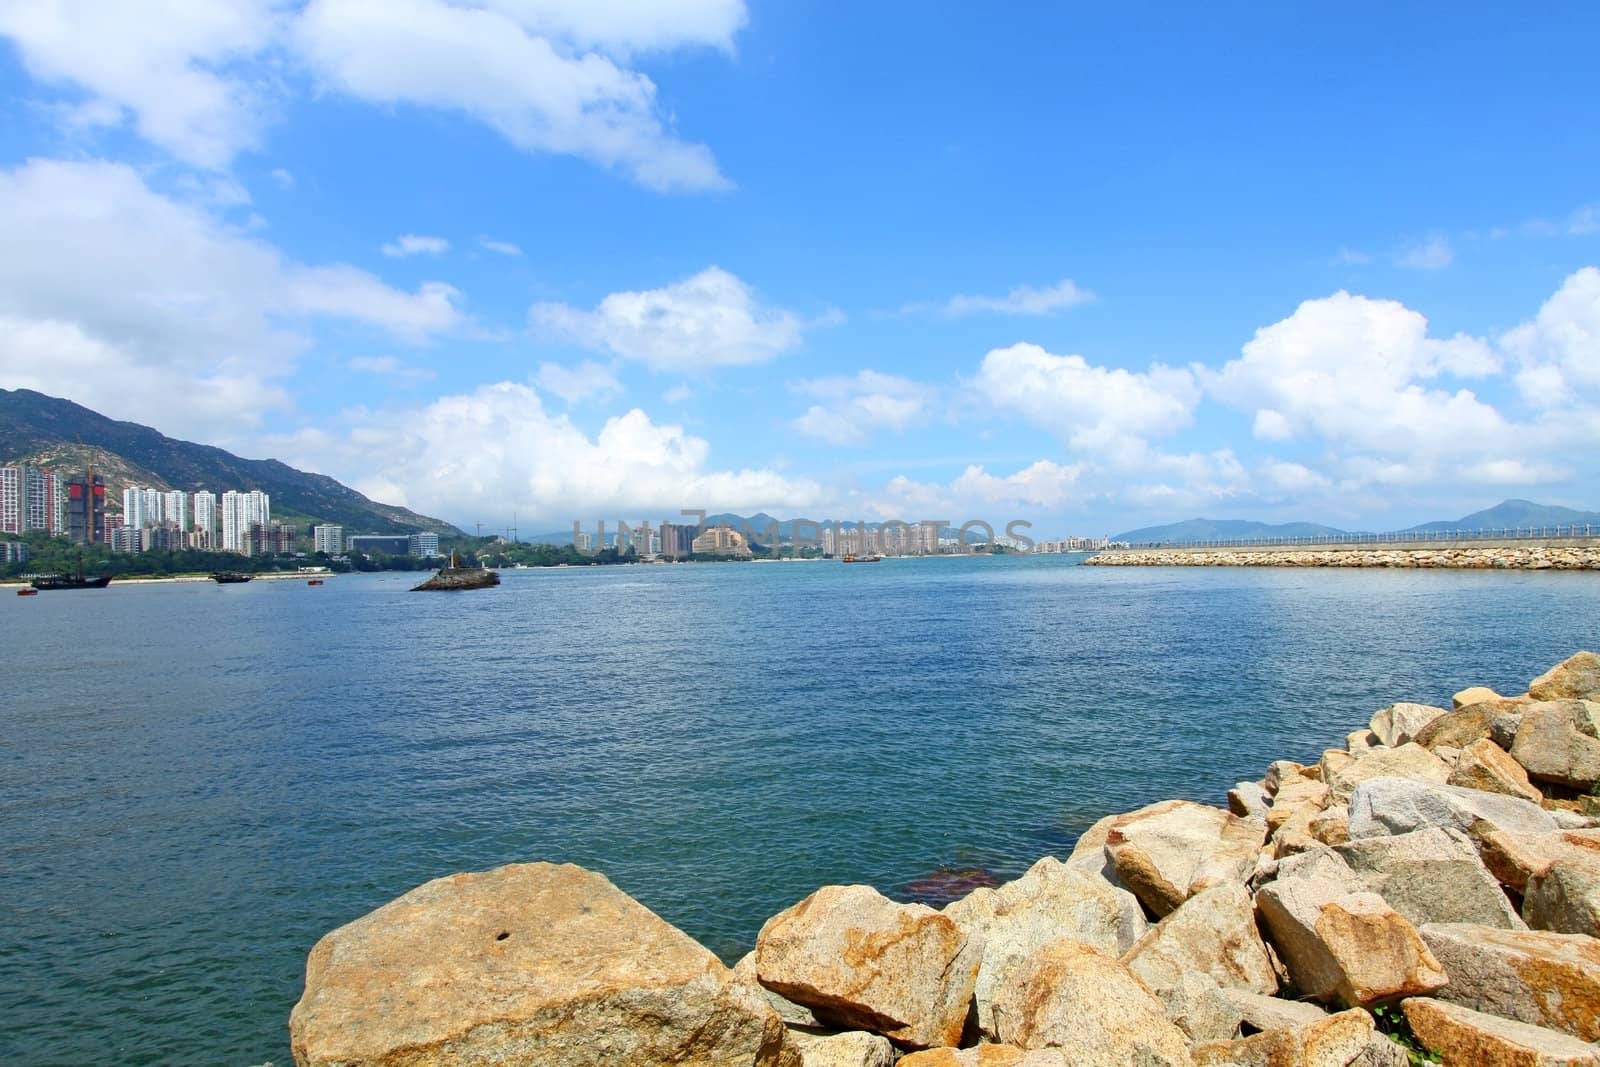 Coastal landscape in Hong Kong at daytime, with many residential buildings.